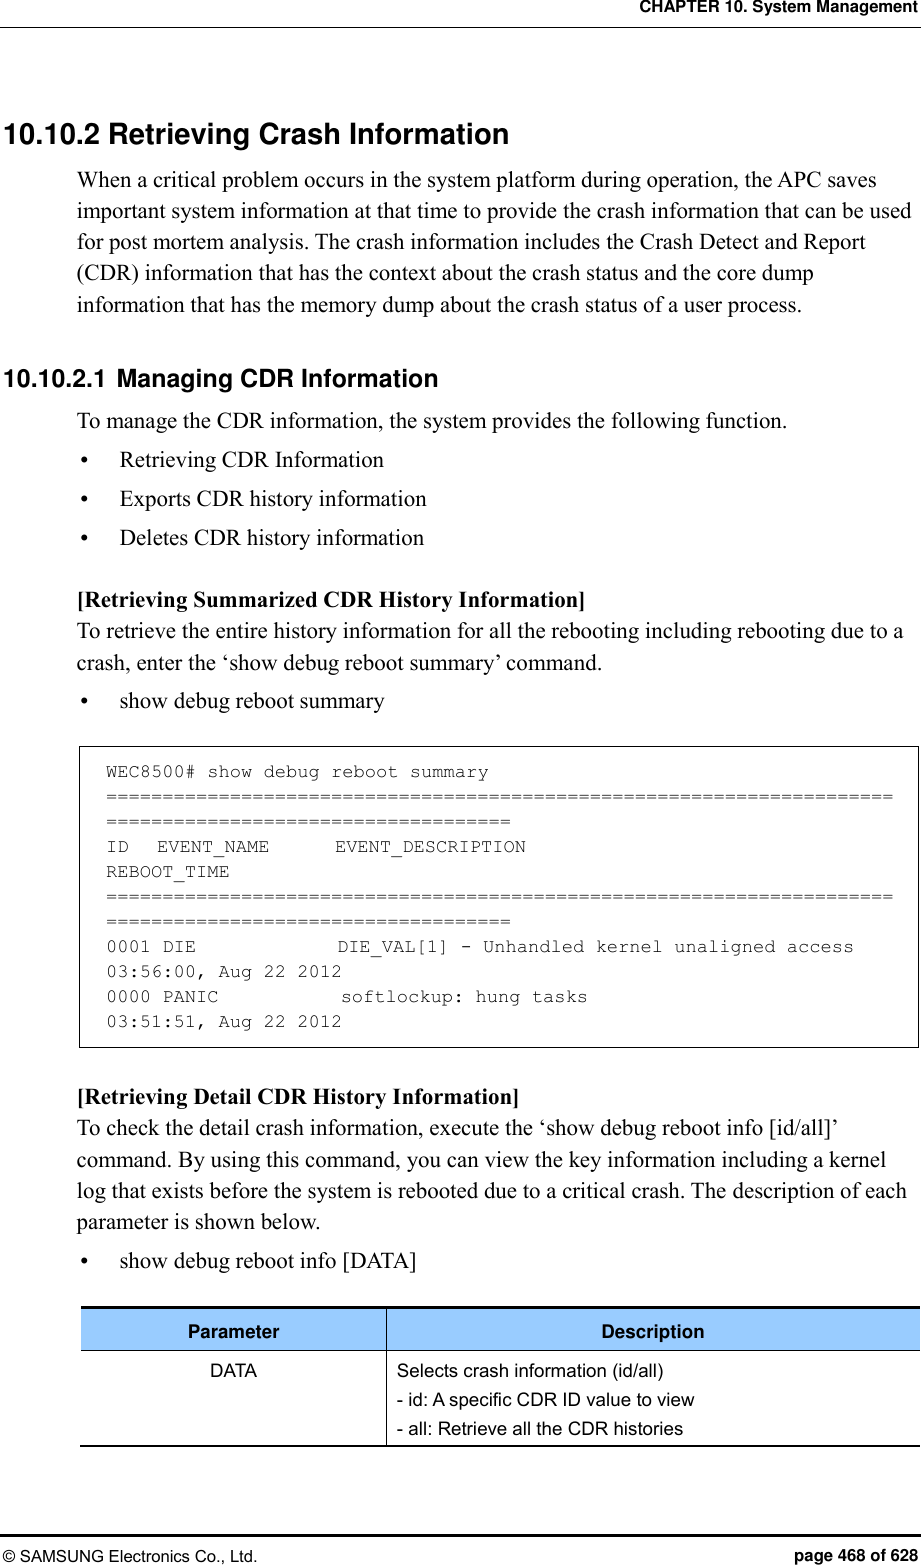 CHAPTER 10. System Management © SAMSUNG Electronics Co., Ltd.  page 468 of 628 10.10.2 Retrieving Crash Information When a critical problem occurs in the system platform during operation, the APC saves important system information at that time to provide the crash information that can be used for post mortem analysis. The crash information includes the Crash Detect and Report (CDR) information that has the context about the crash status and the core dump information that has the memory dump about the crash status of a user process.  10.10.2.1 Managing CDR Information To manage the CDR information, the system provides the following function.  Retrieving CDR Information  Exports CDR history information  Deletes CDR history information  [Retrieving Summarized CDR History Information] To retrieve the entire history information for all the rebooting including rebooting due to a crash, enter the ‘show debug reboot summary’ command.  show debug reboot summary  WEC8500# show debug reboot summary ========================================================================================================== ID   EVENT_NAME       EVENT_DESCRIPTION                                           REBOOT_TIME ========================================================================================================== 0001 DIE               DIE_VAL[1] - Unhandled kernel unaligned access         03:56:00, Aug 22 2012 0000 PANIC             softlockup: hung tasks                                      03:51:51, Aug 22 2012  [Retrieving Detail CDR History Information] To check the detail crash information, execute the ‘show debug reboot info [id/all]’ command. By using this command, you can view the key information including a kernel log that exists before the system is rebooted due to a critical crash. The description of each parameter is shown below.  show debug reboot info [DATA]  Parameter Description DATA Selects crash information (id/all) - id: A specific CDR ID value to view - all: Retrieve all the CDR histories  